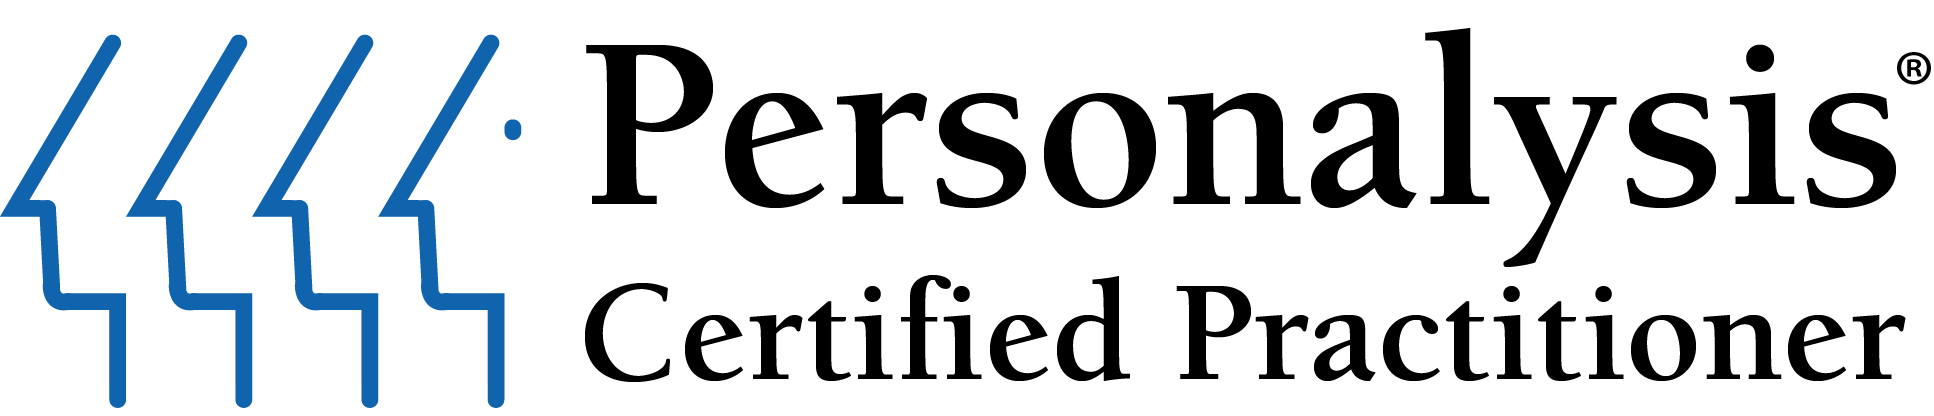 Personalysis Certified Practitioner 300ppi.png